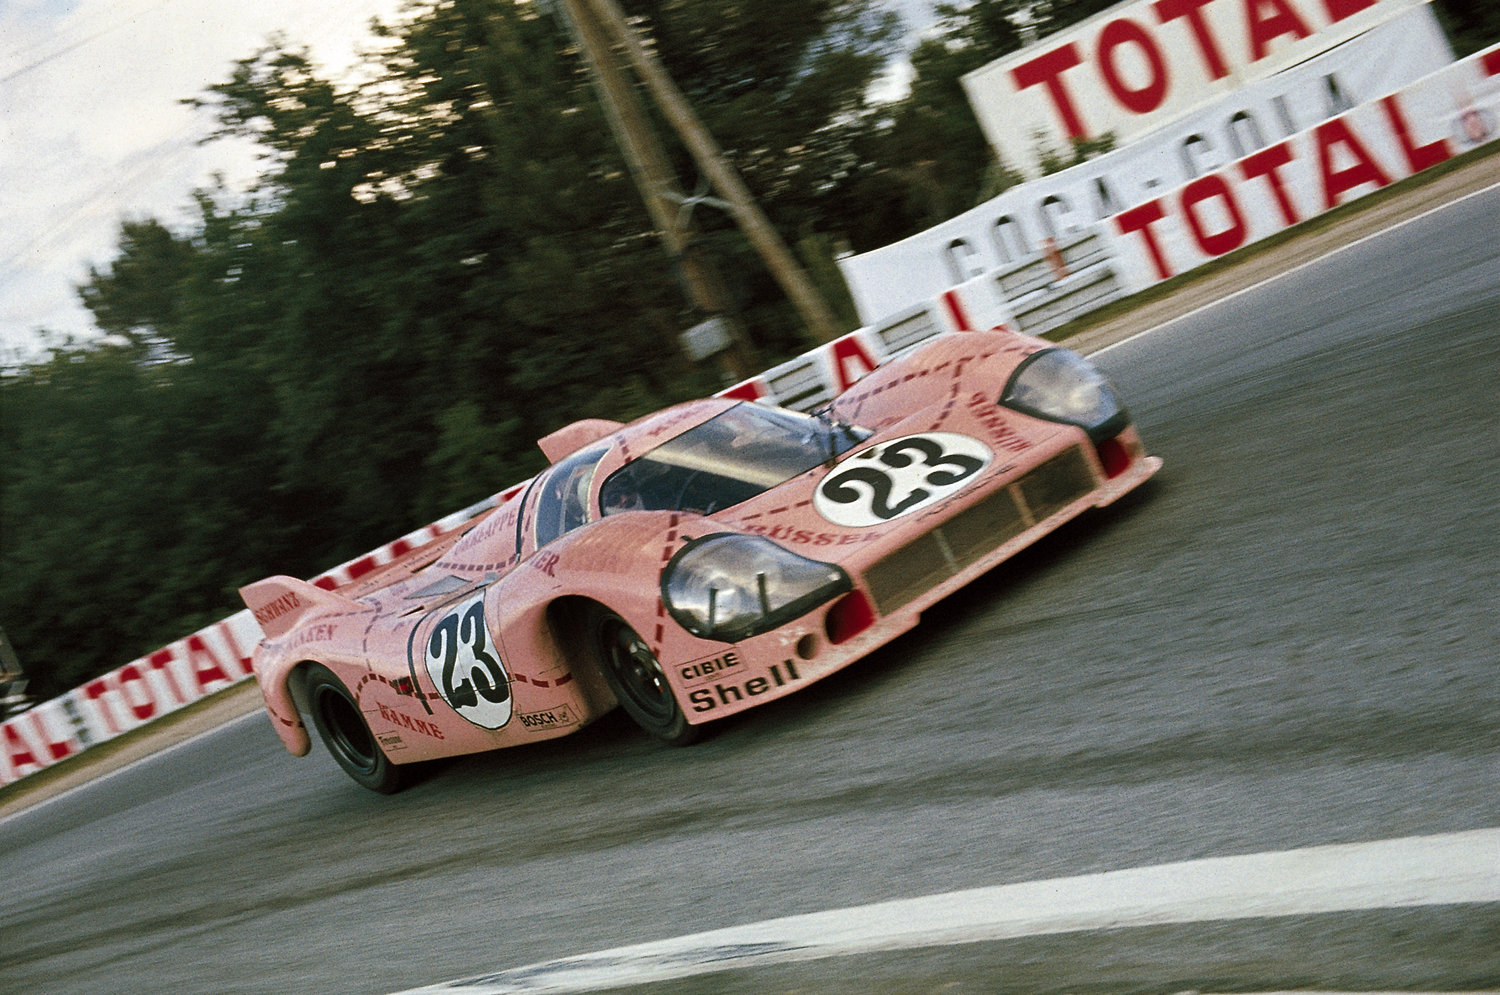 917/20 in Pink Pig racing livery at 1971 Le Mans